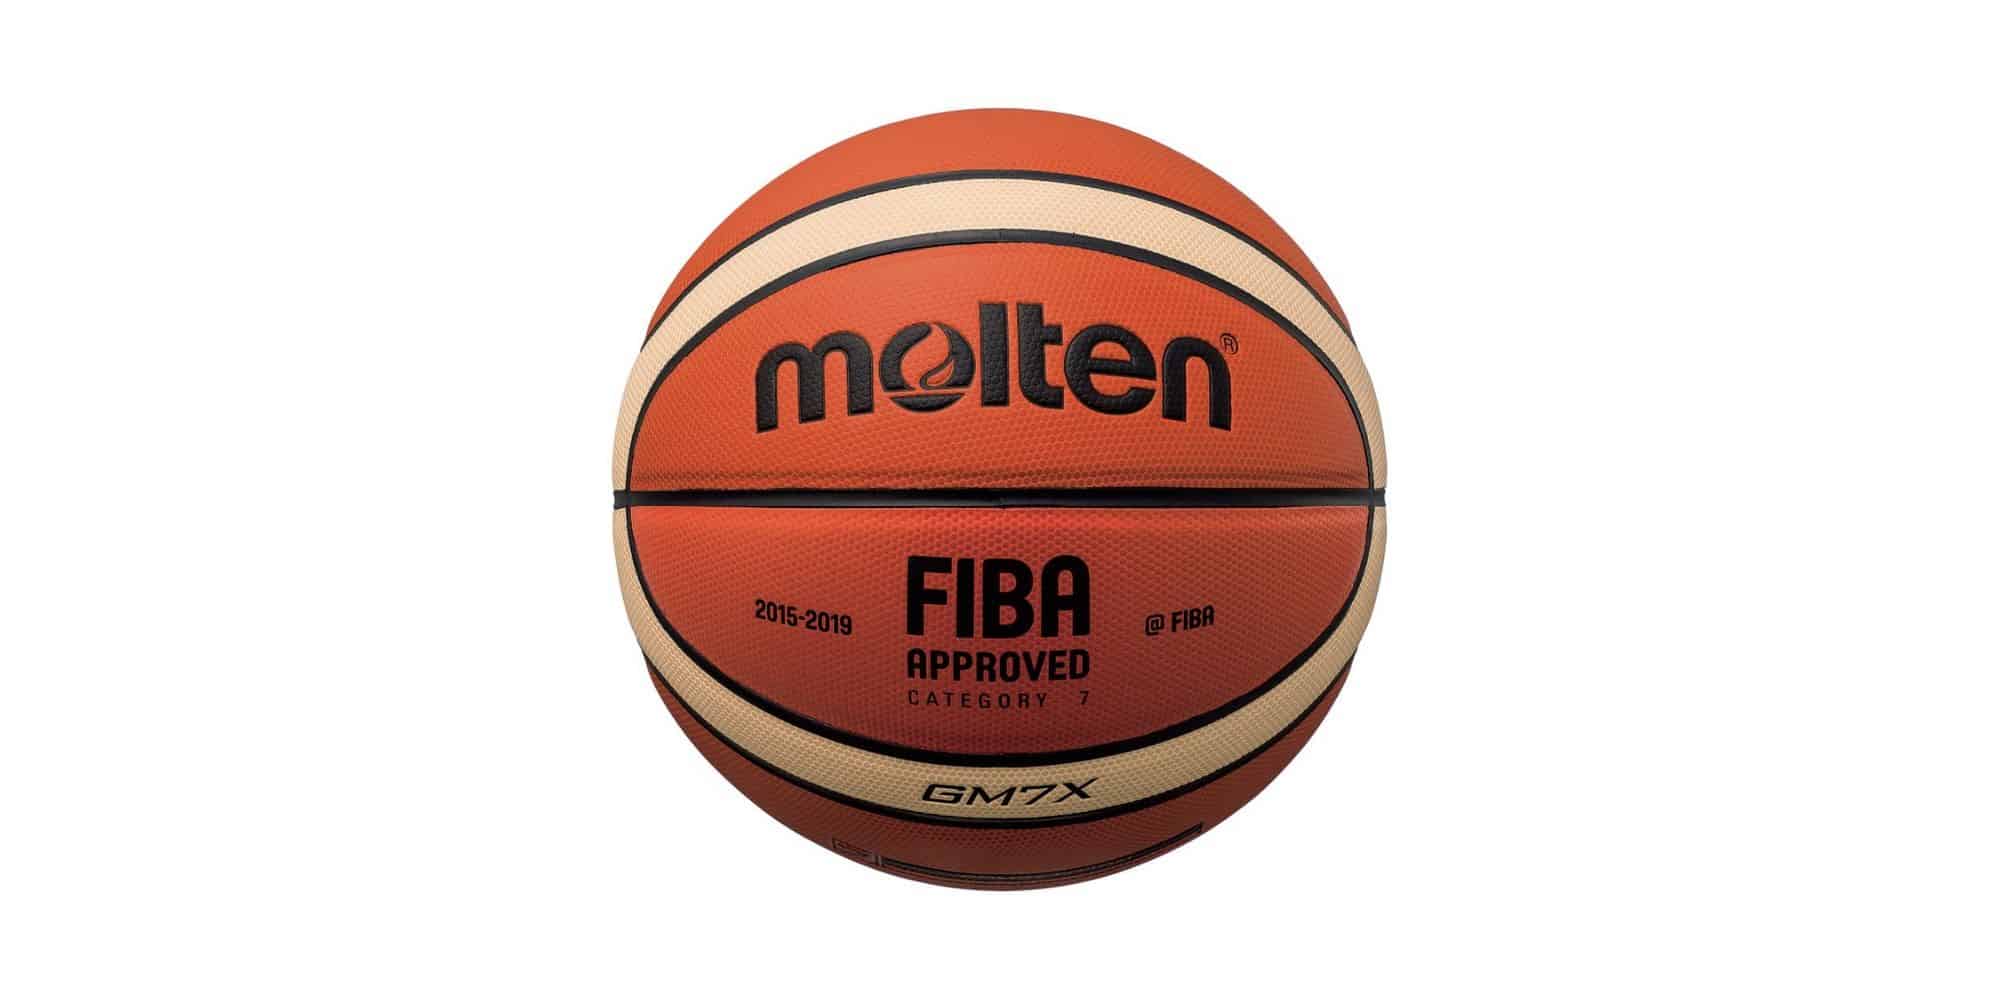 featured image for molten gm7x basketball review